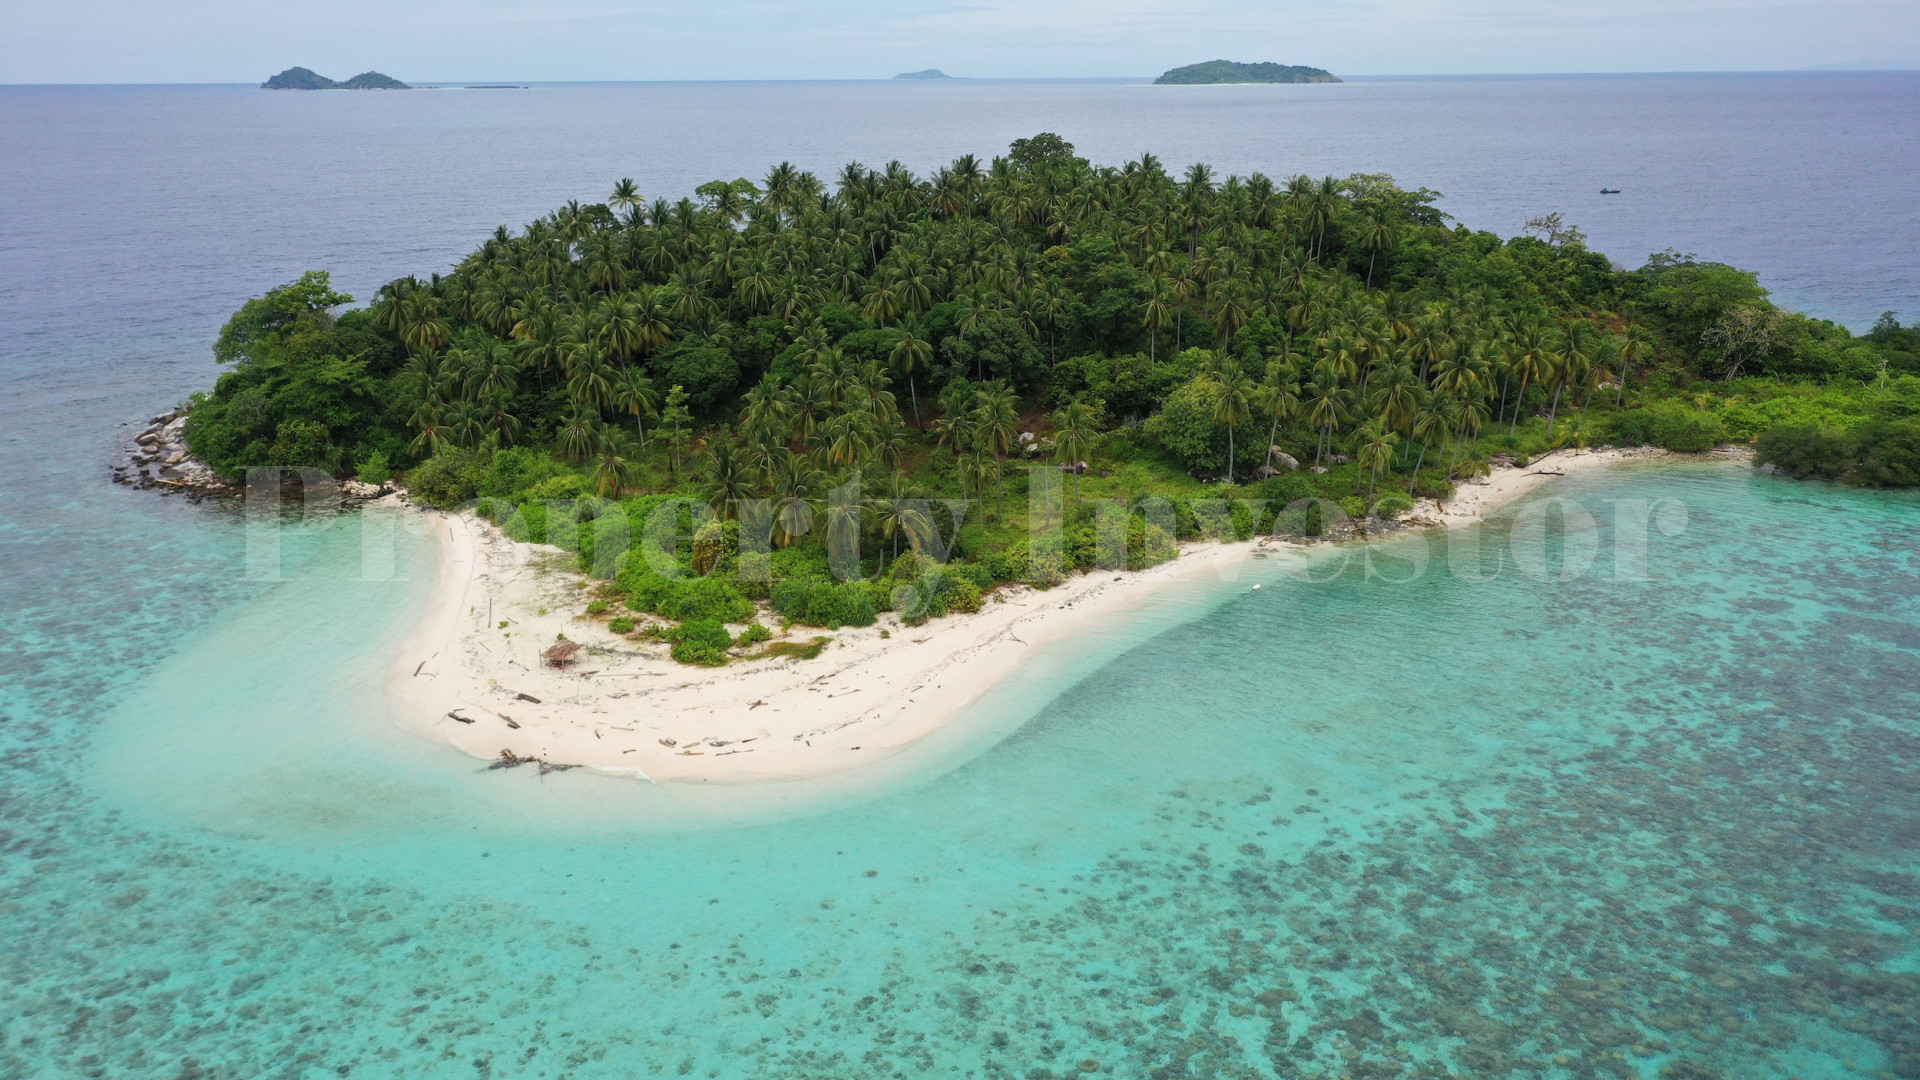 Stunning 5 Hectare Private Virgin Tropical Island for Commercial or Residential Development in the Riau Islands, Indonesia